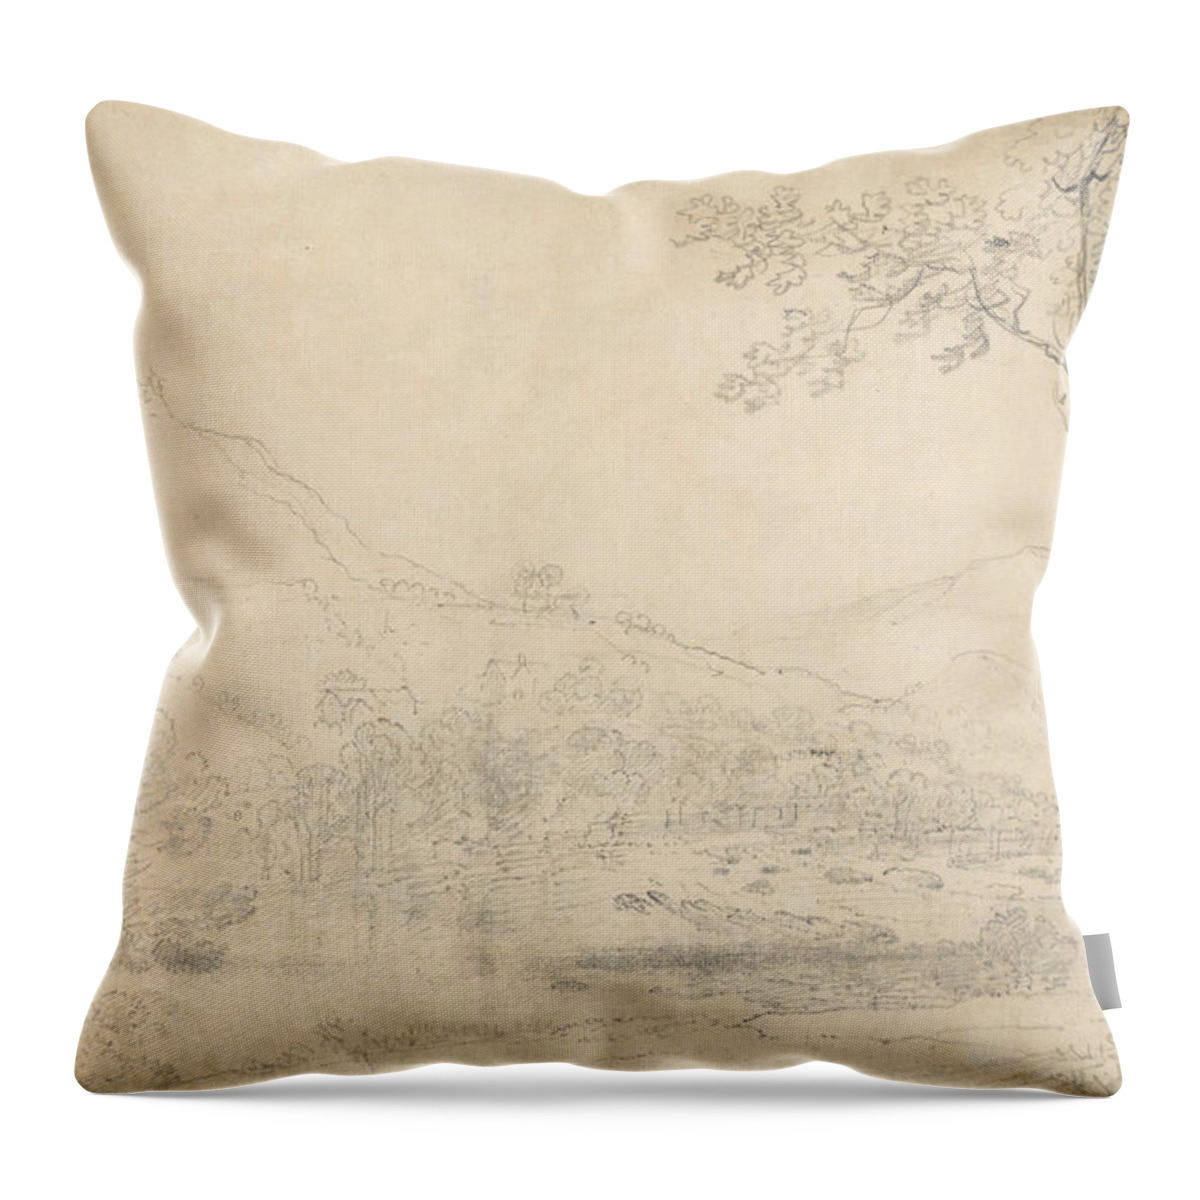 18th Century Art Throw Pillow featuring the drawing Castell Dinas Bran, Wales by Richard Wilson